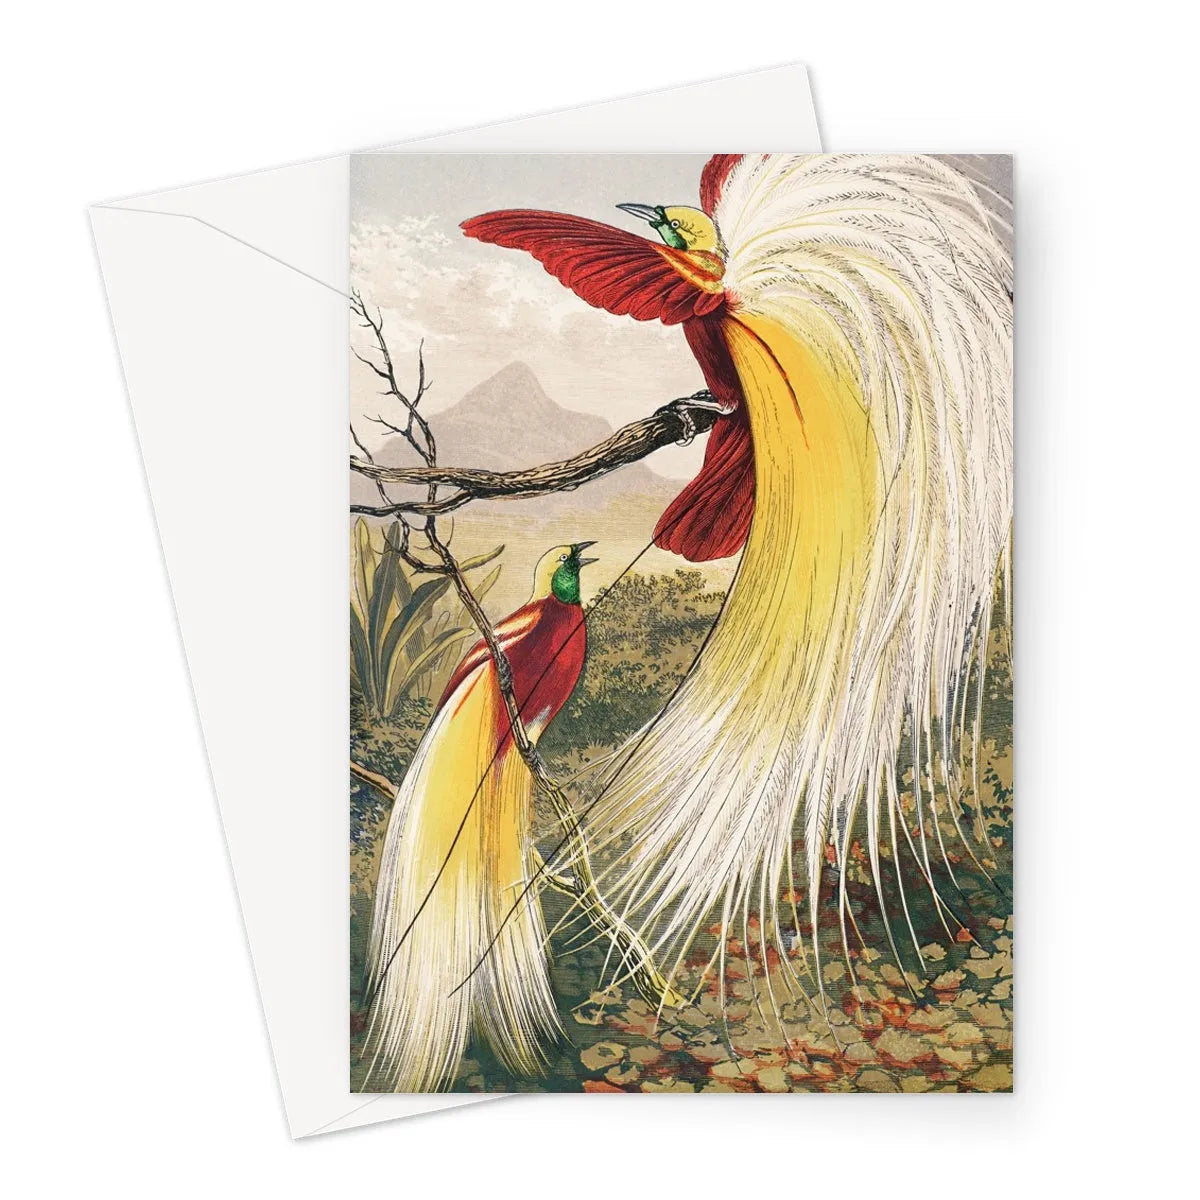 Bird Of Paradise By Benjamin Fawcett Greeting Card - A5 Portrait / 1 Card - Greeting & Note Cards - Aesthetic Art